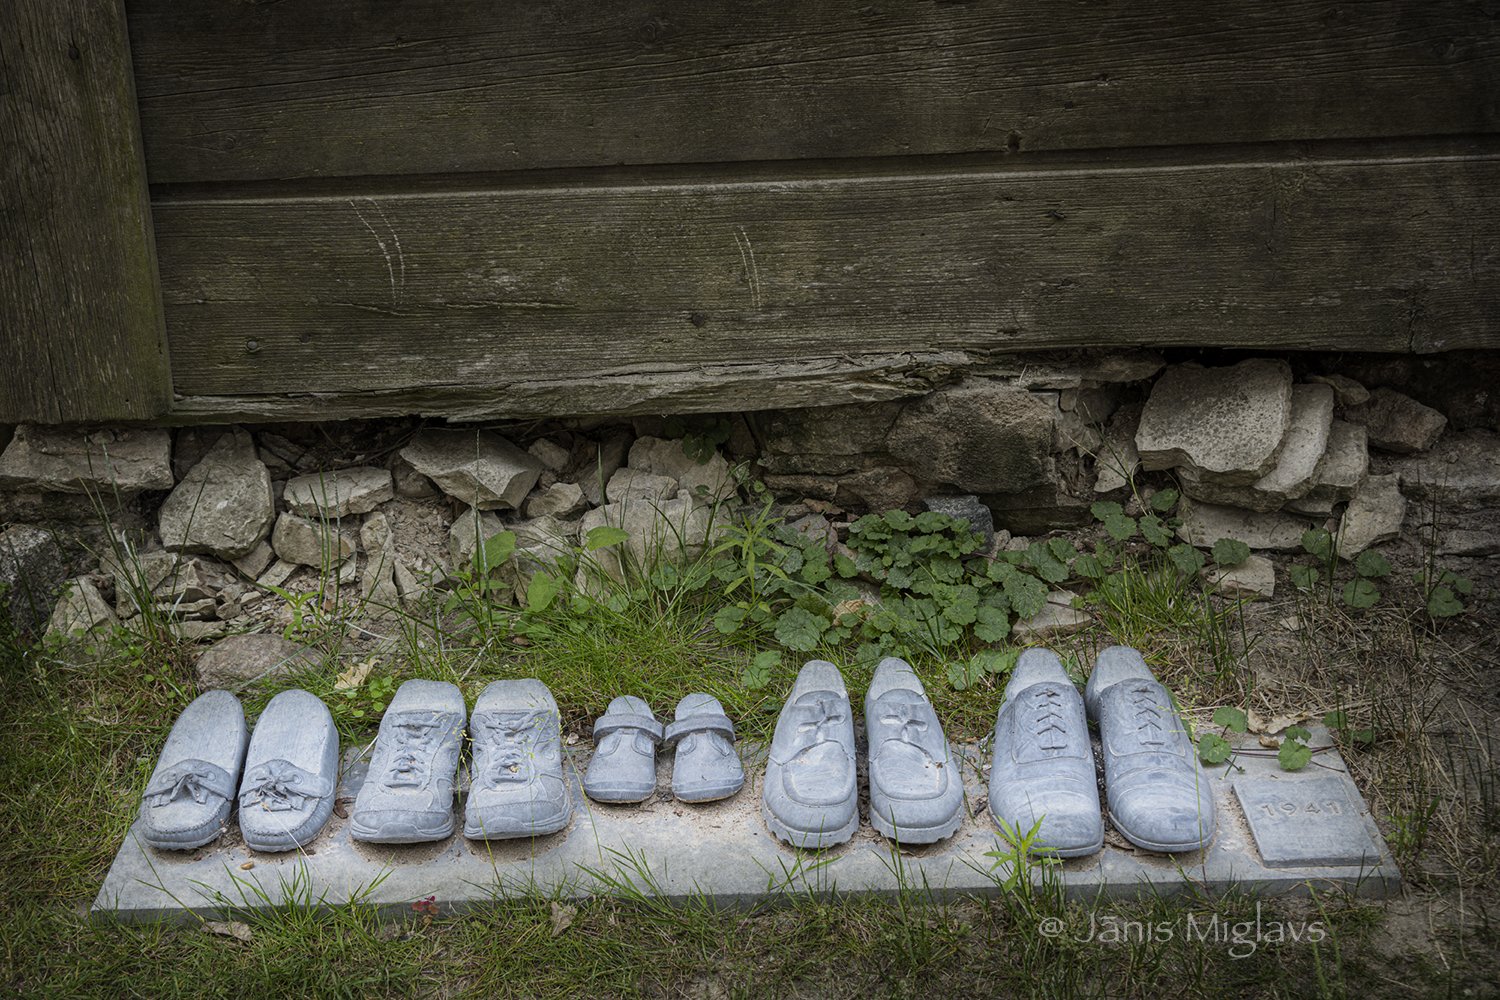 One family's shoes, a visual reminder